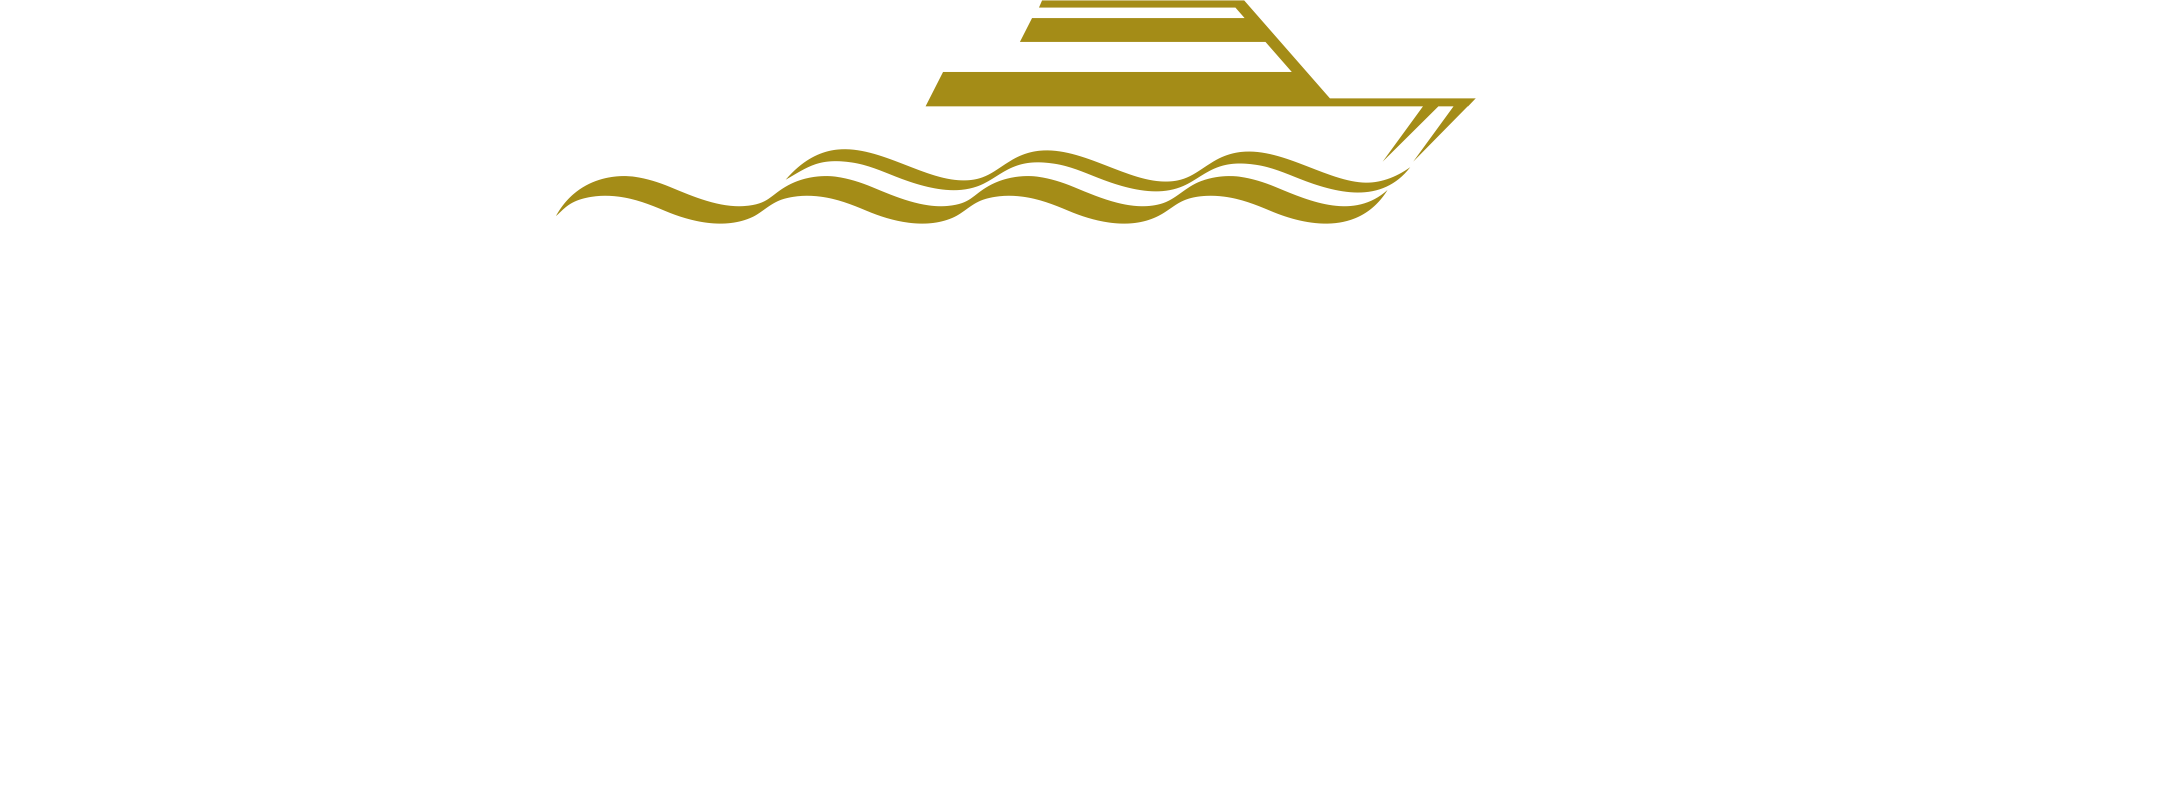 New Years Eve Cruises Vancouver Dinner Cruises